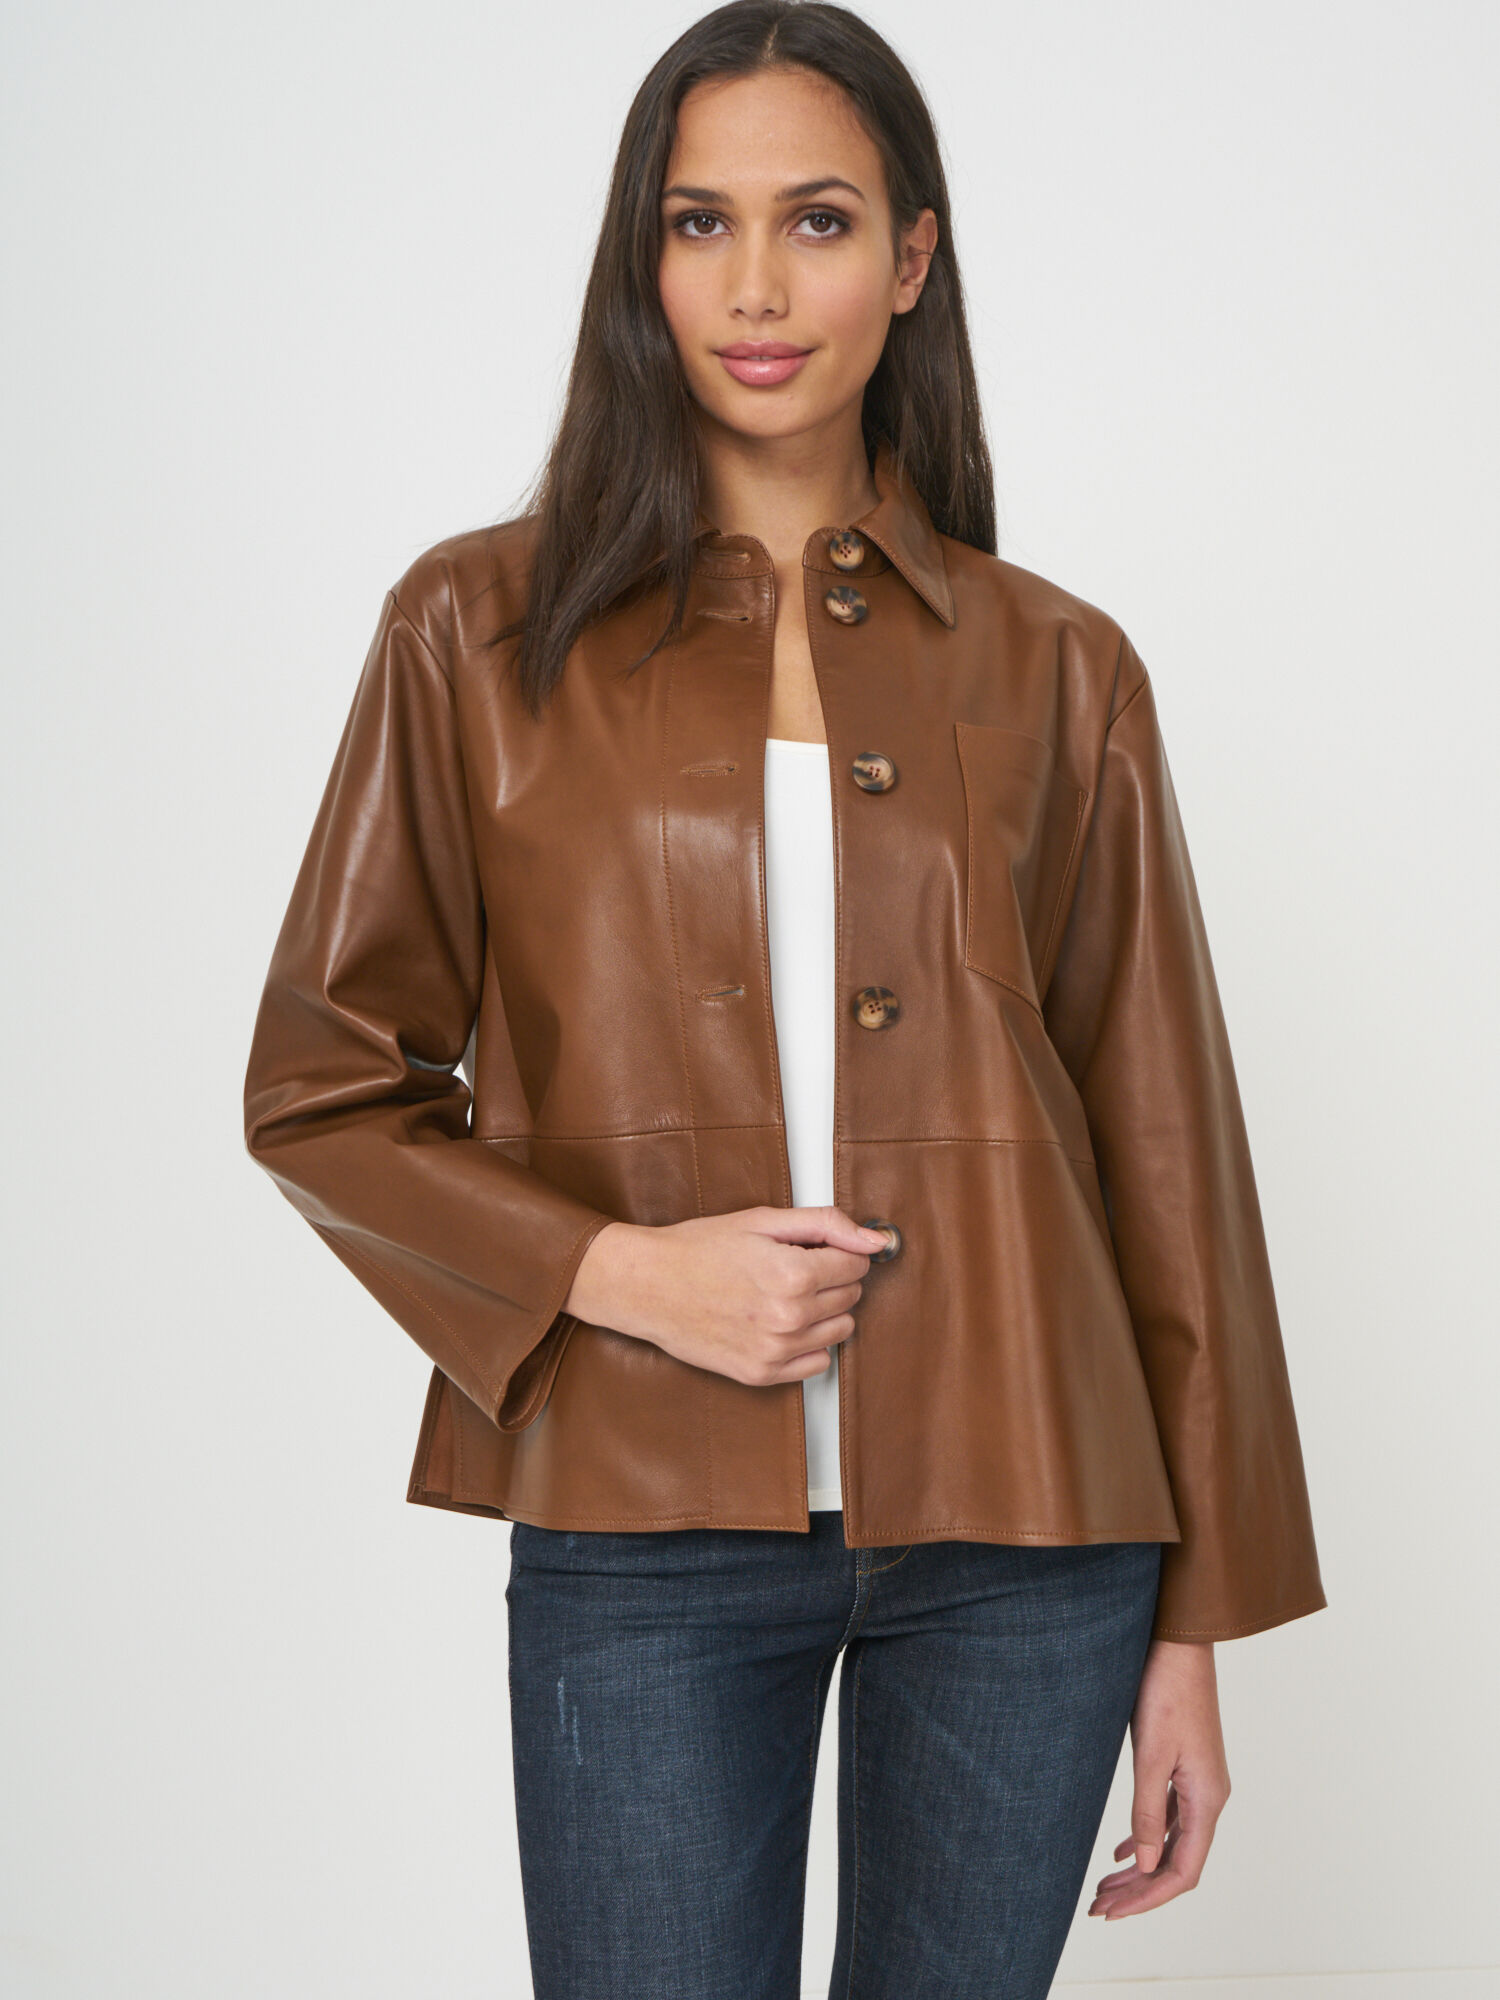 REPEAT cashmere Loose fit leather shirt jacket